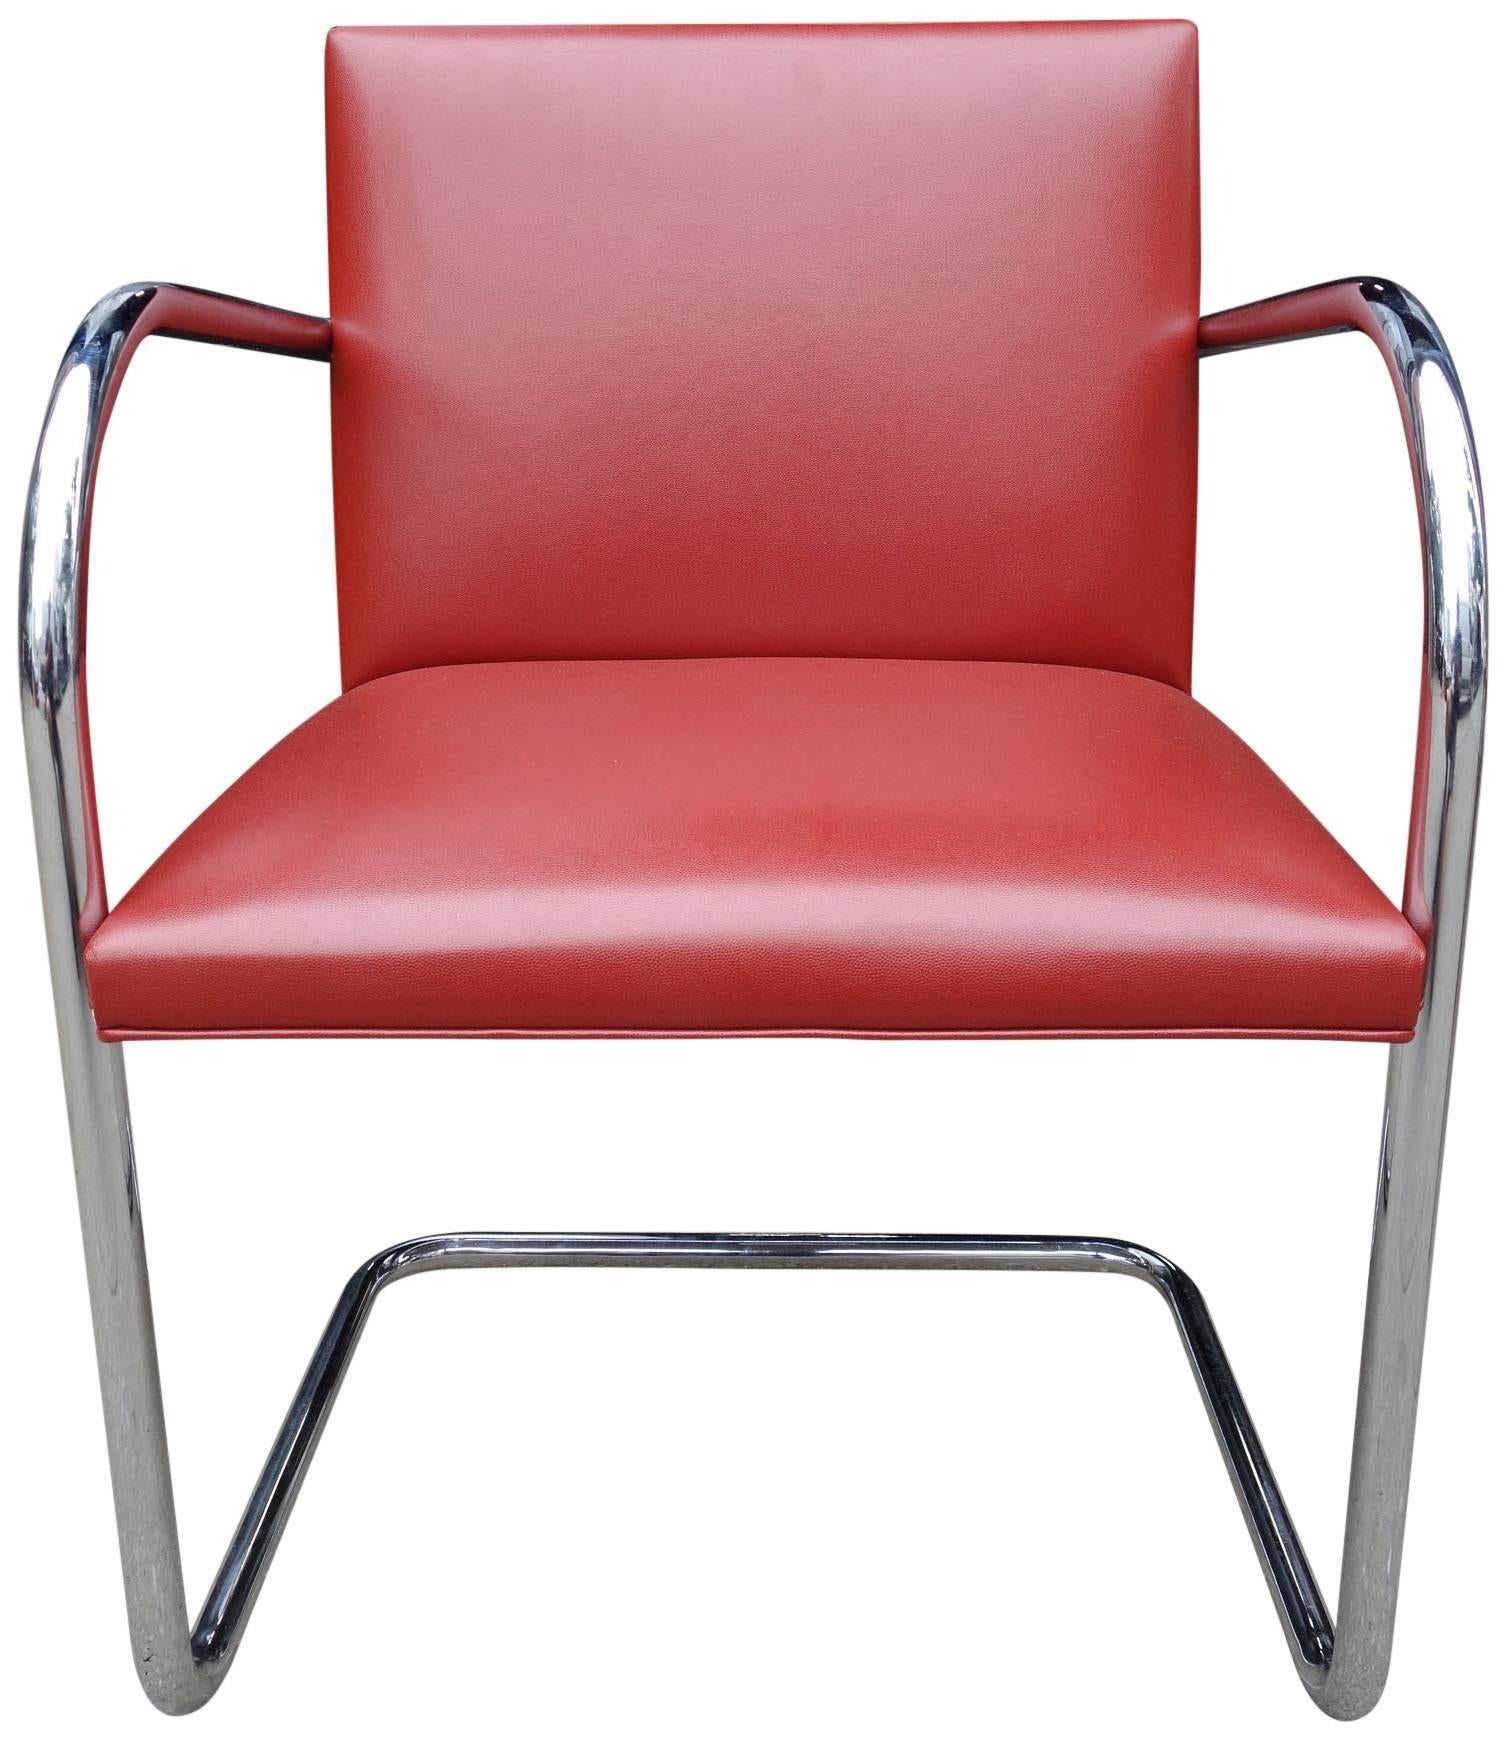 North American Midcentury Knoll Brno Chairs by Mies van der Rohe